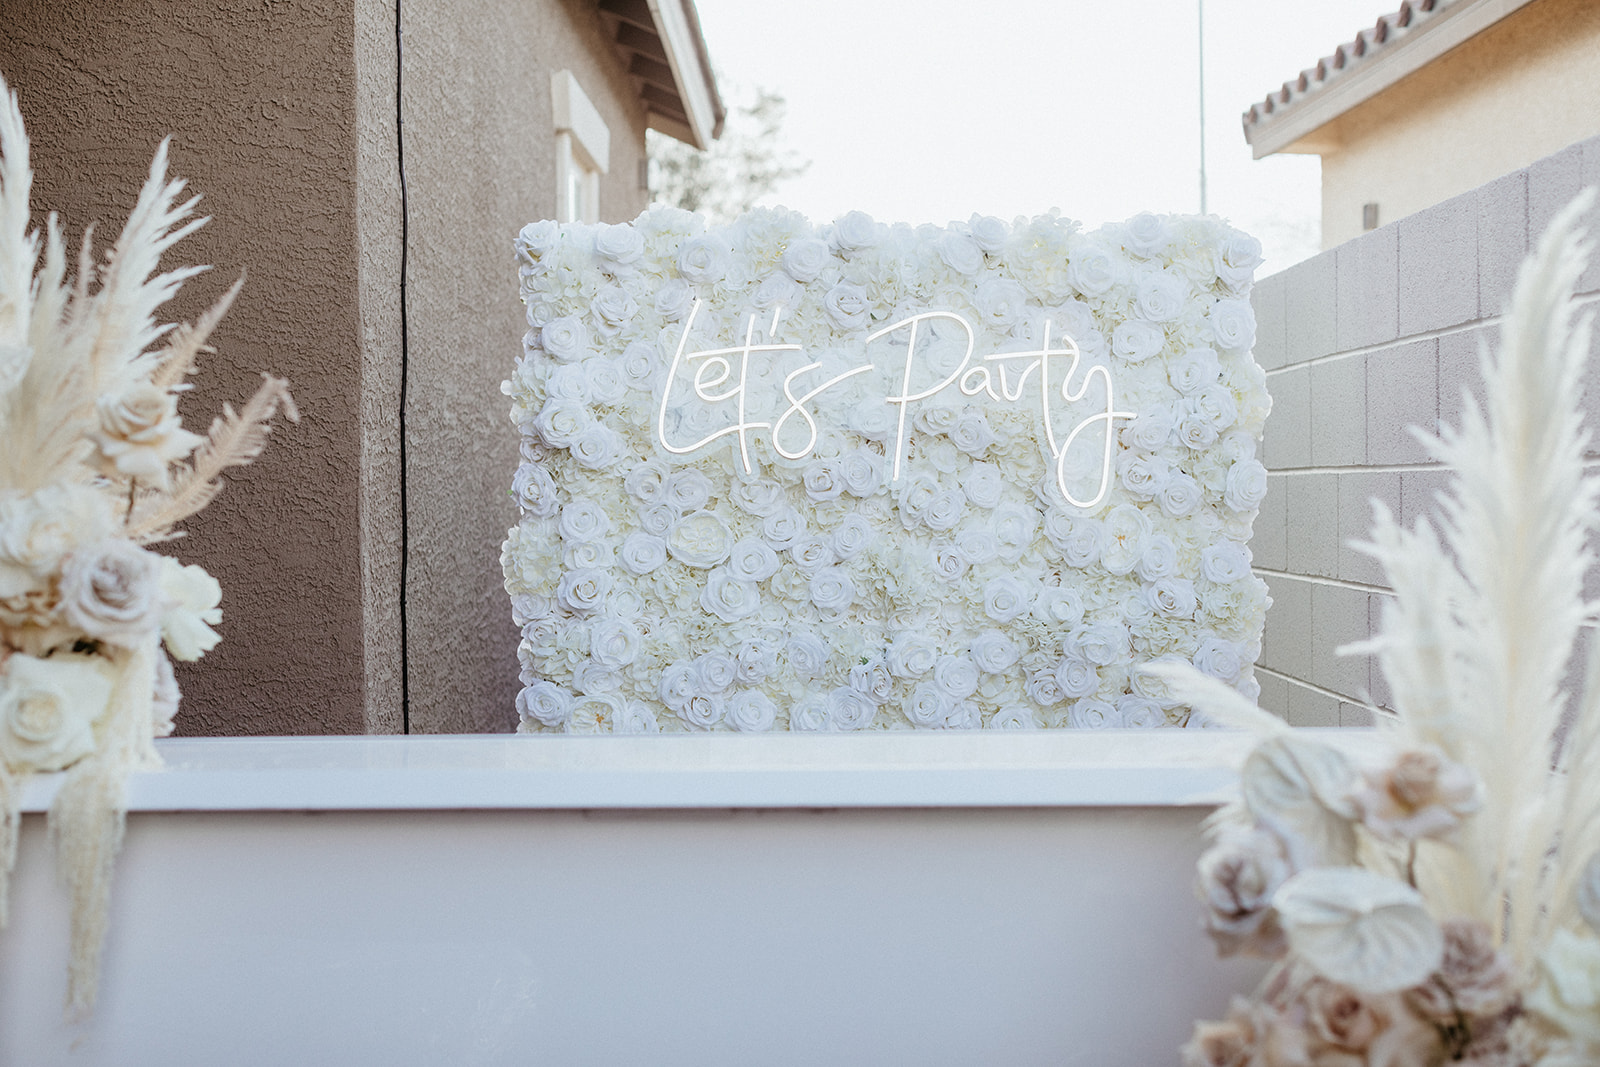 White Flower Wall and Let's Party Neon Sign for Las Vegas Backyard Wedding Reception 